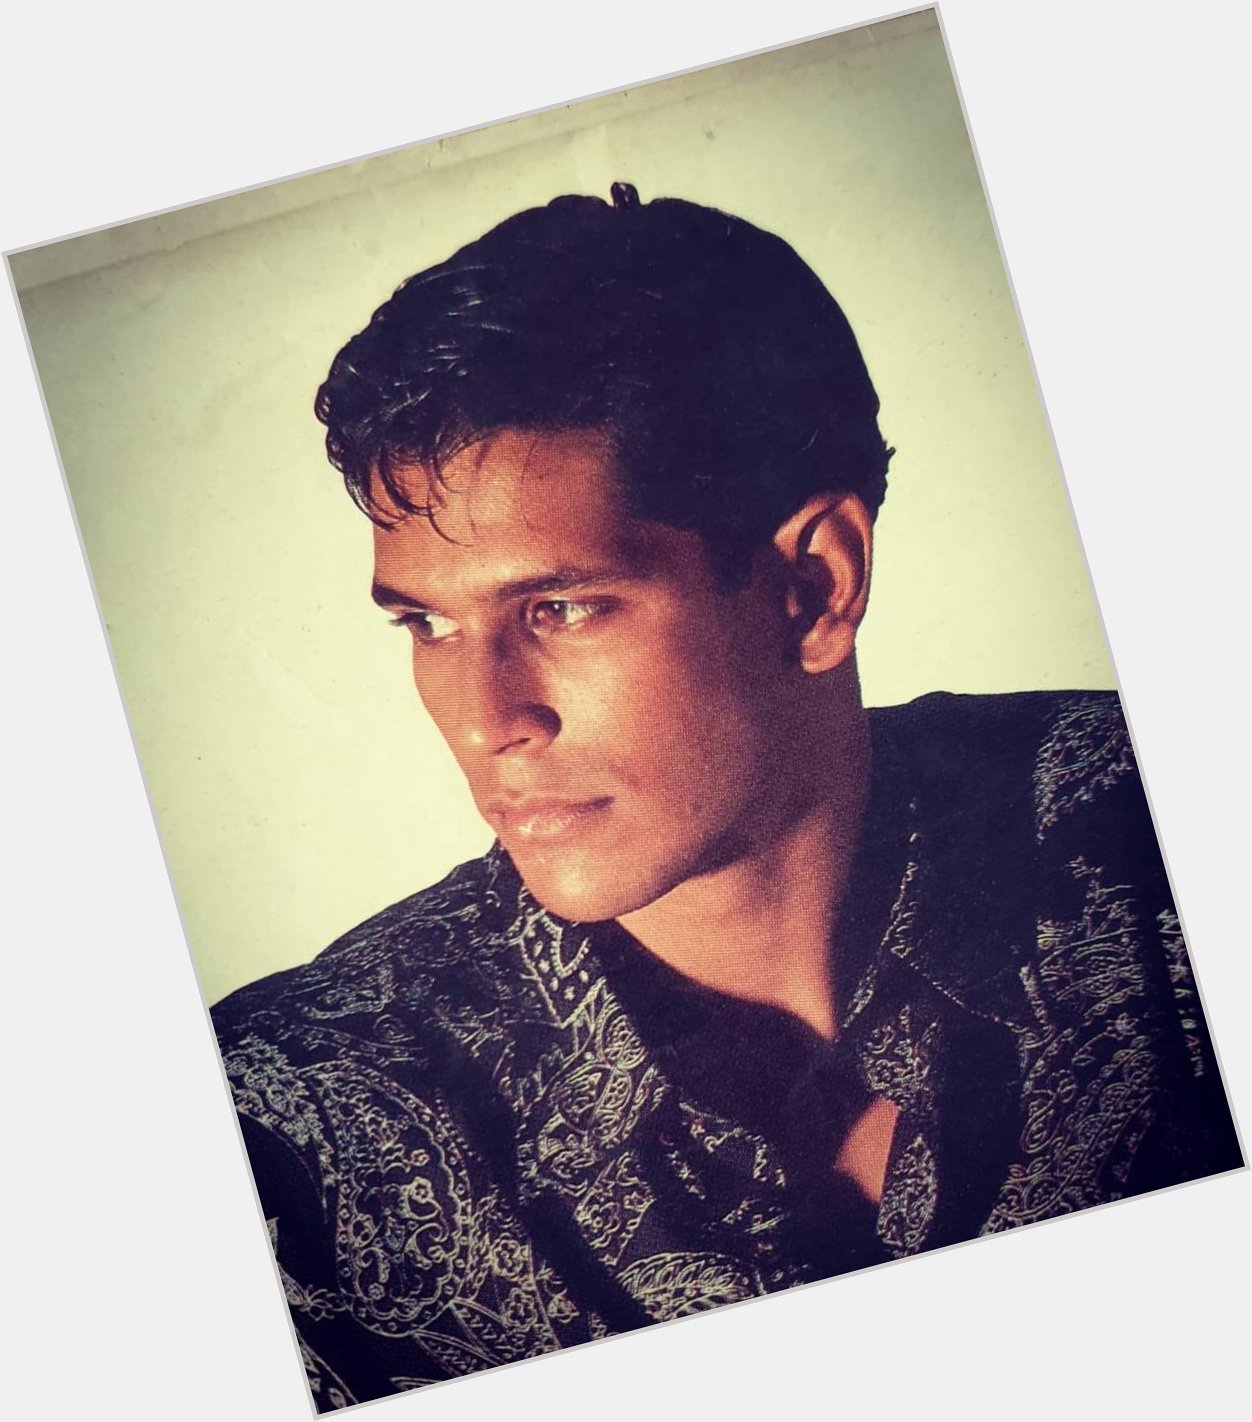 Happy Birthday to the man who inspired many lives 
HBD Milind Soman 